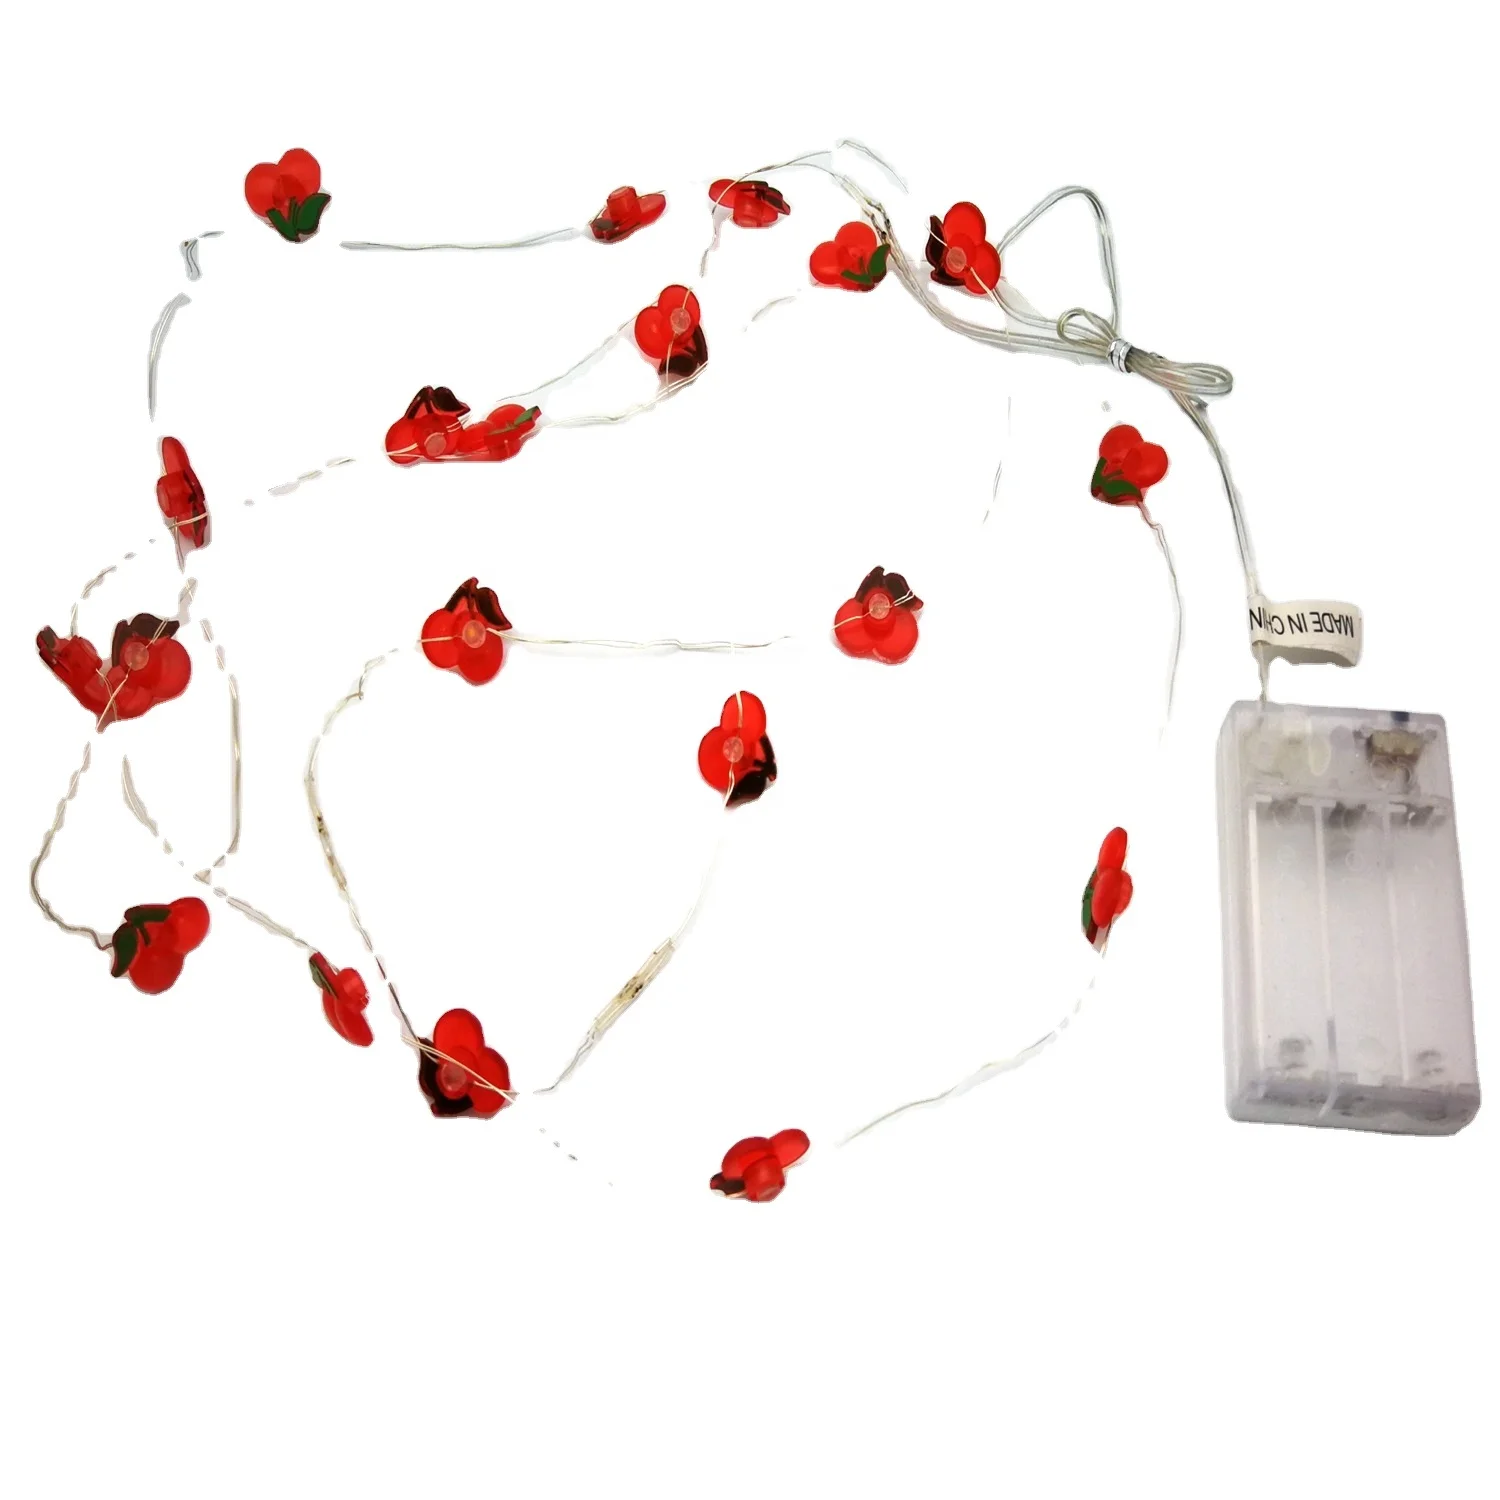 Wholesale Price Home Decoration Illuminated Cherry LED String Light for All Holiday